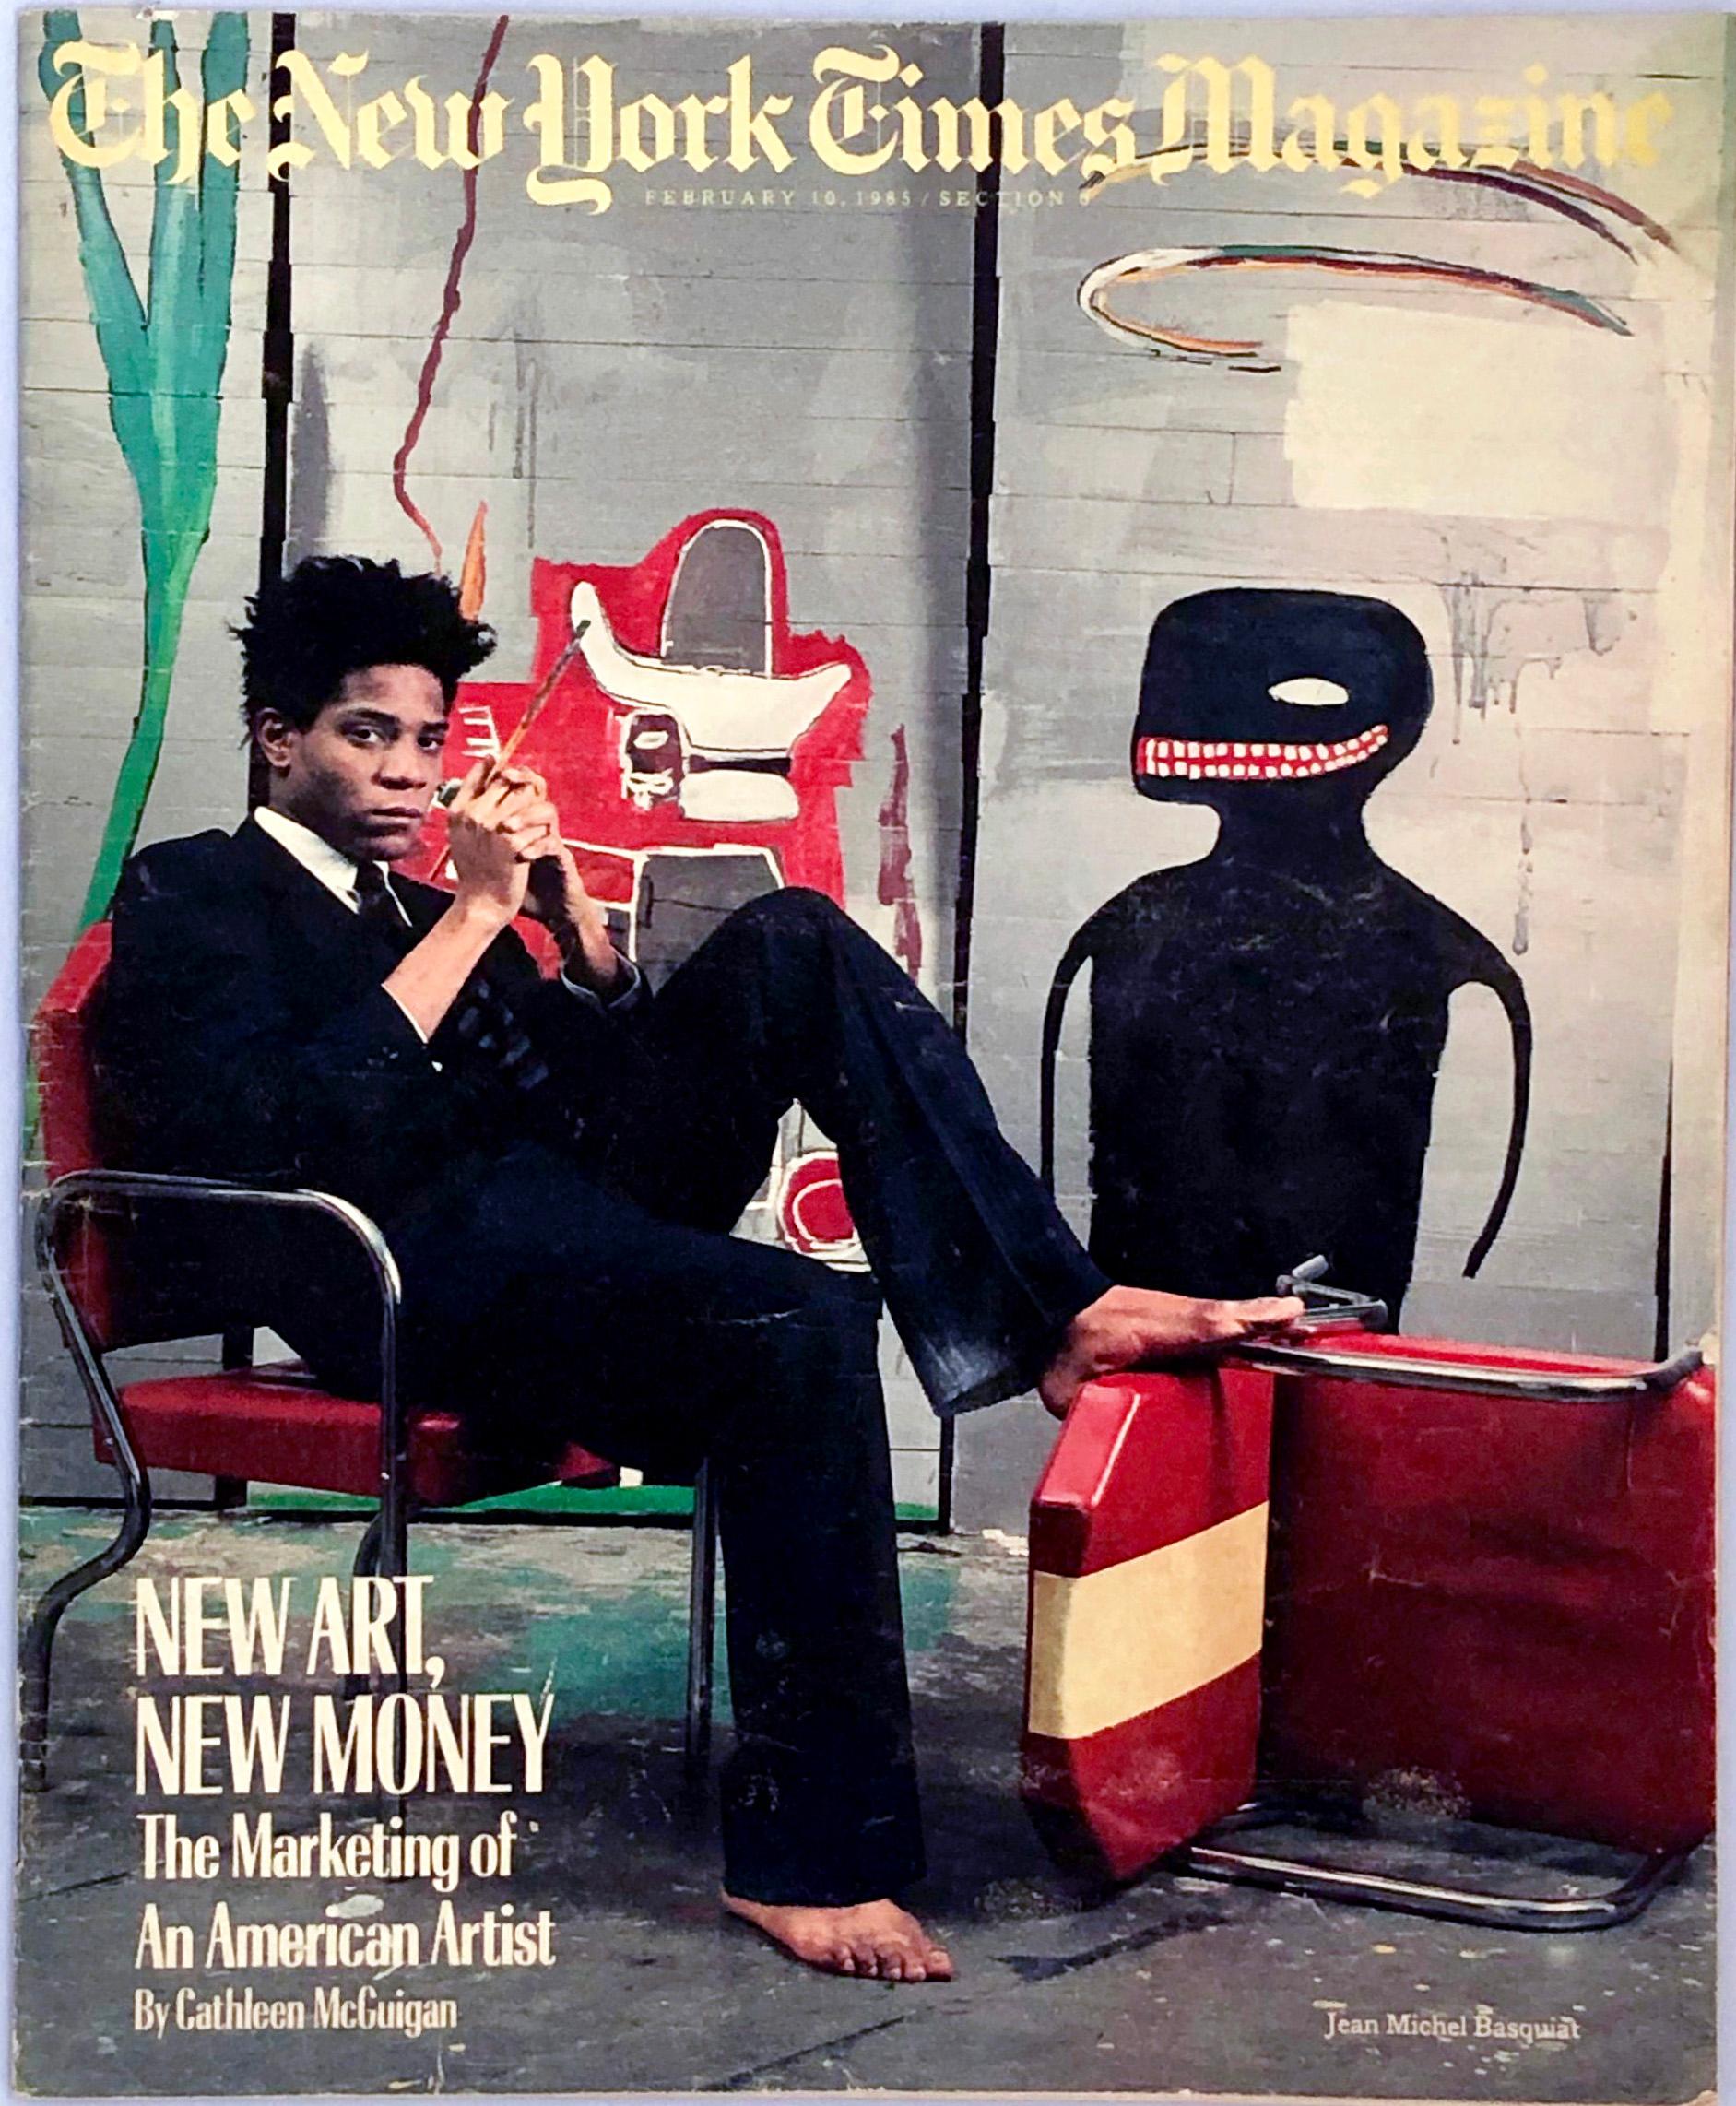 Presented here is the rare iconic Basquiat New York Times Magazine 1985: 
The New York Times Magazine, February 10, 1985 edition famously entitled “New Art, New Money: The Marketing of an American Artist." A must have Basquiat collector's item. Rare